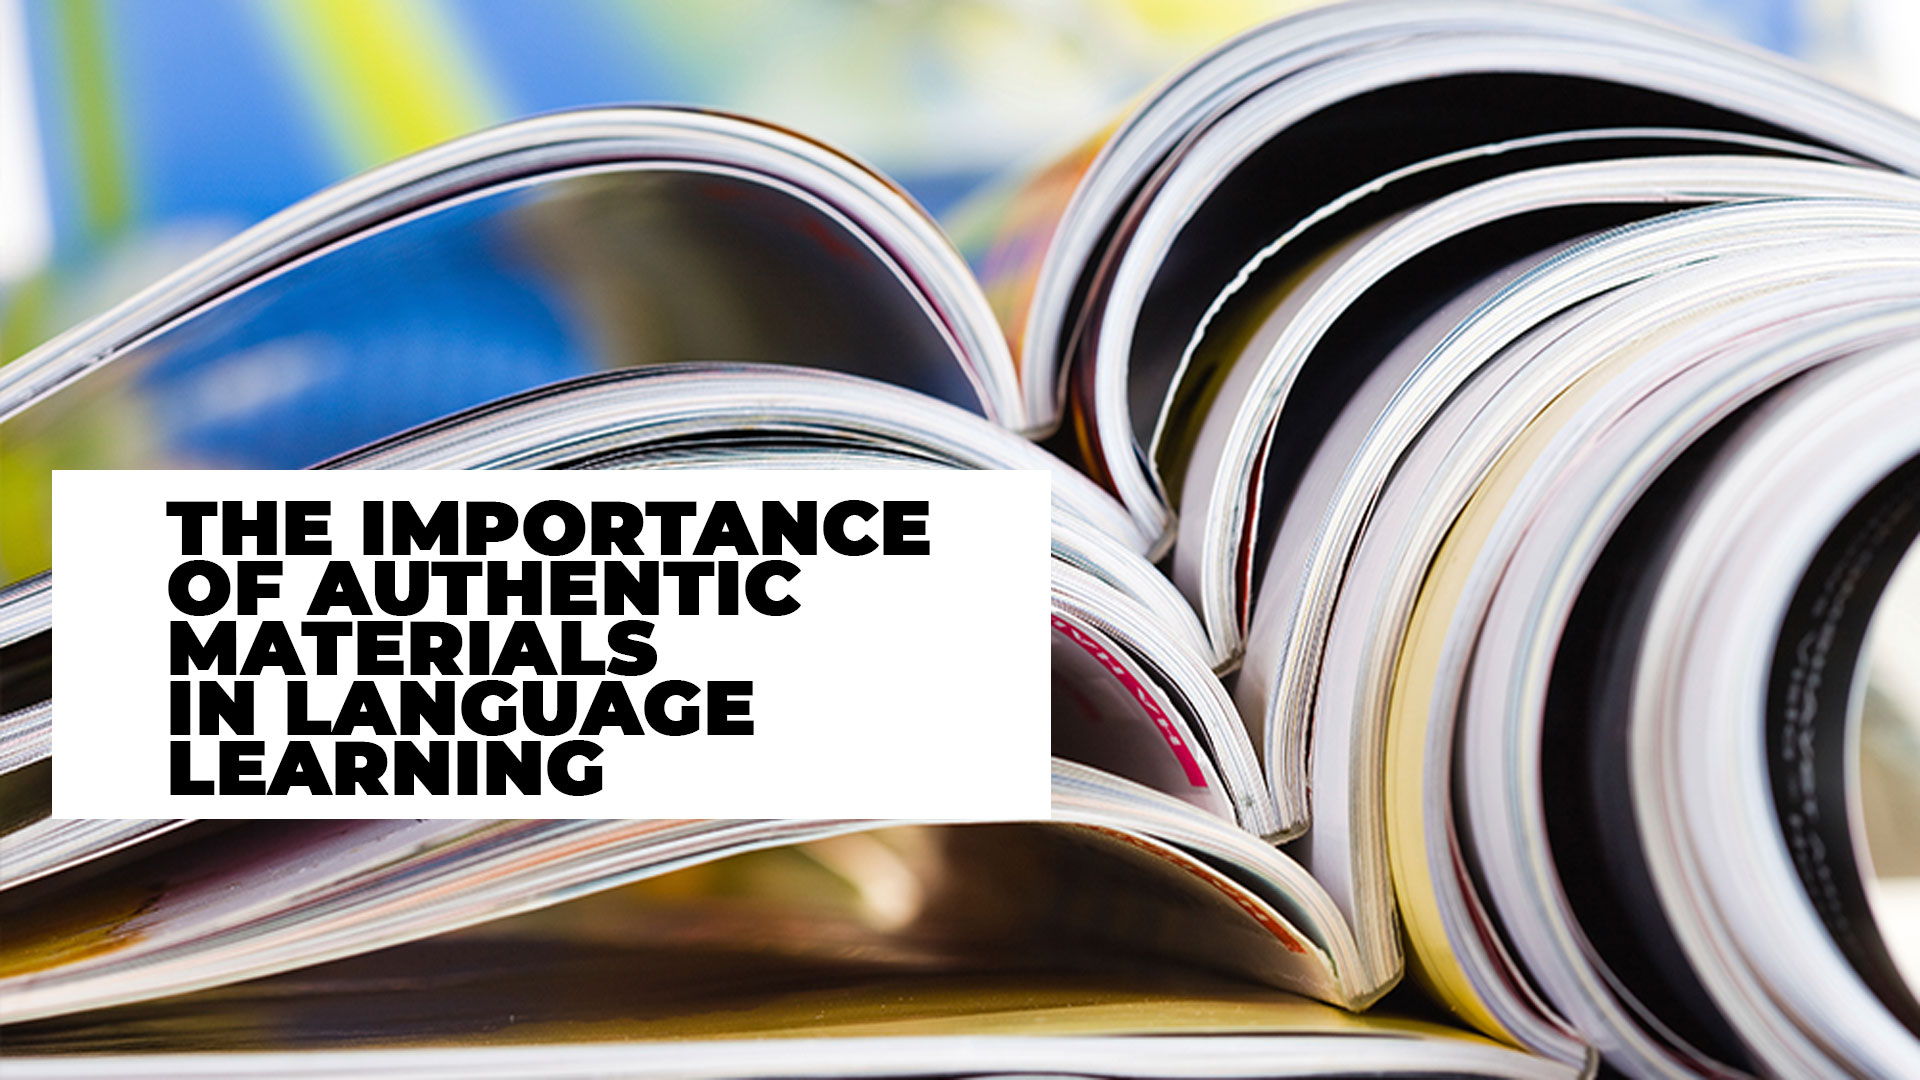 The Importance of Authentic Materials in Language Learning